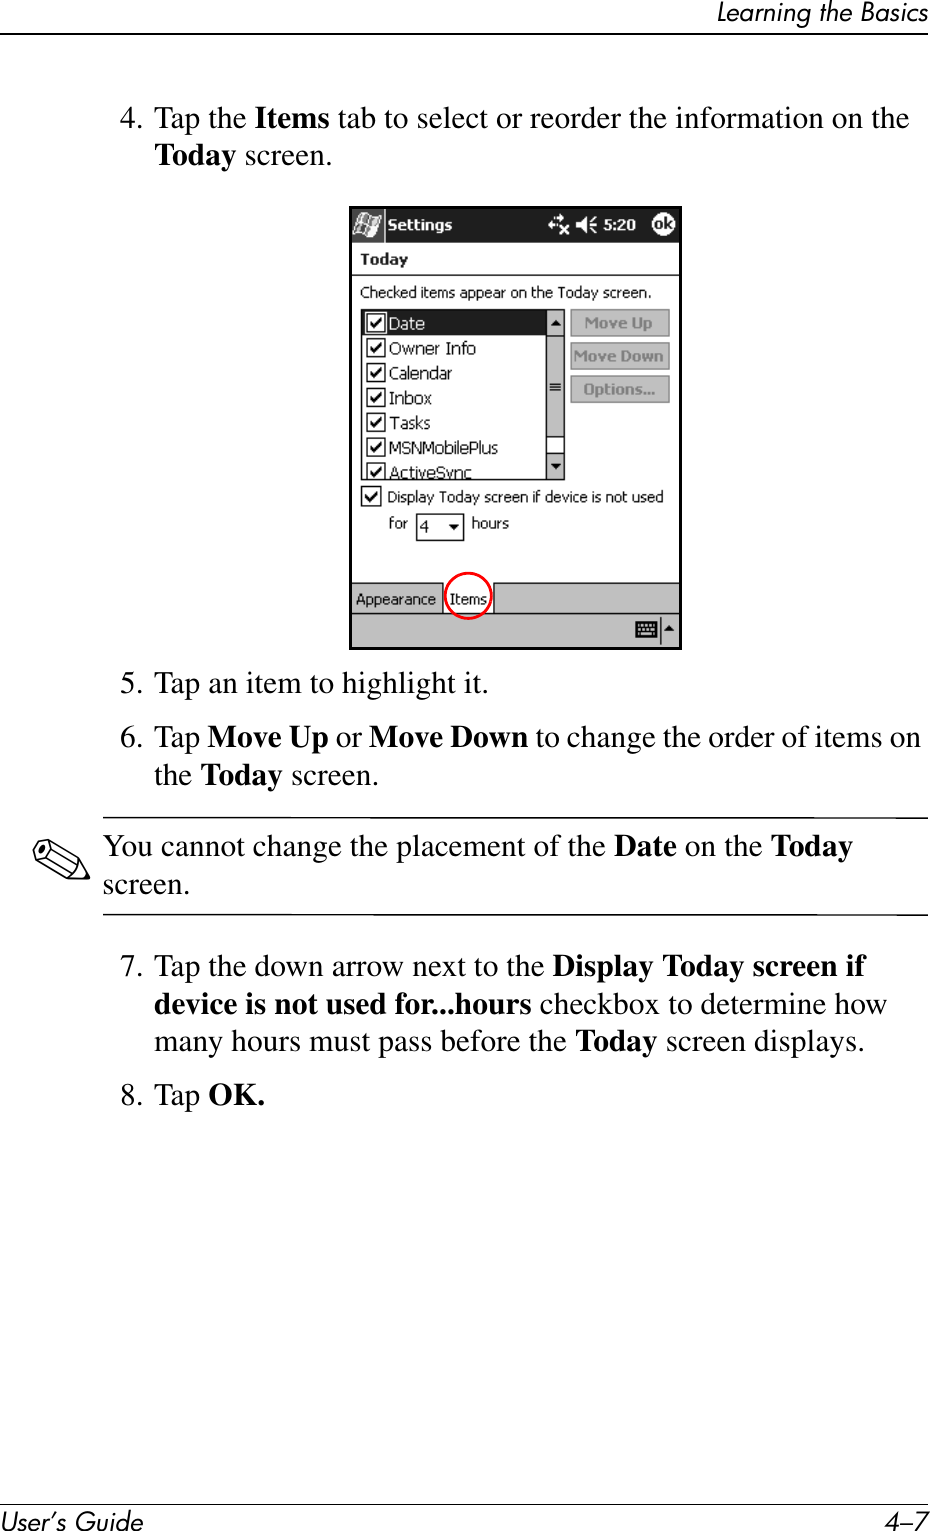 Learning the BasicsUser’s Guide 4–74. Tap the Items tab to select or reorder the information on the Today screen.5. Tap an item to highlight it.6. Tap Move Up or Move Down to change the order of items on the Today screen.✎You cannot change the placement of the Date on the Today screen.7. Tap the down arrow next to the Display Today screen if device is not used for...hours checkbox to determine how many hours must pass before the Today screen displays.8. Tap OK.